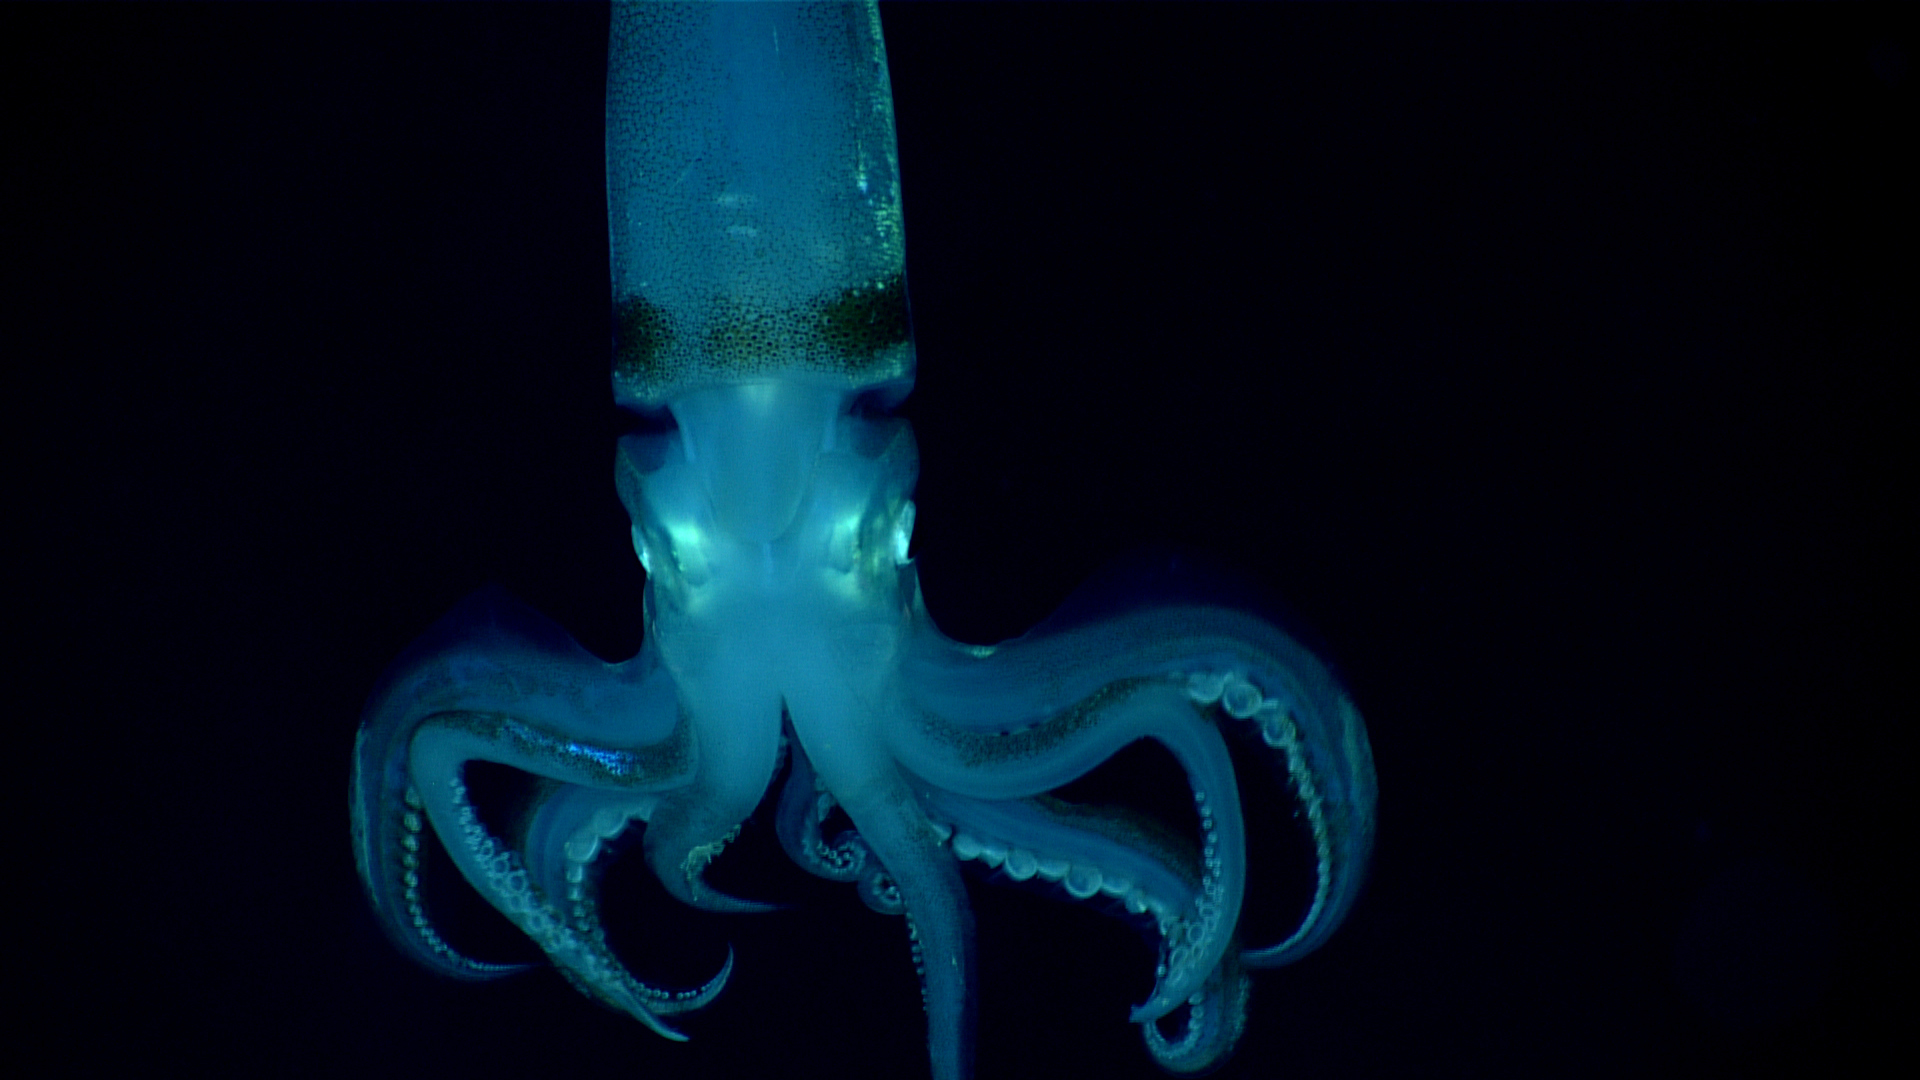 It’s October! Time for all things spooky. In addition to enjoying a new haunting ocean find each day on this page, “treat” yourself by dressing up your desktop with our newest desktop wallpaper, featuring this eerie squid seen during the third Voyage to the Ridge 2022 expedition. Download it here so that you can gaze at its spookalicious glory each time you log into your computer!